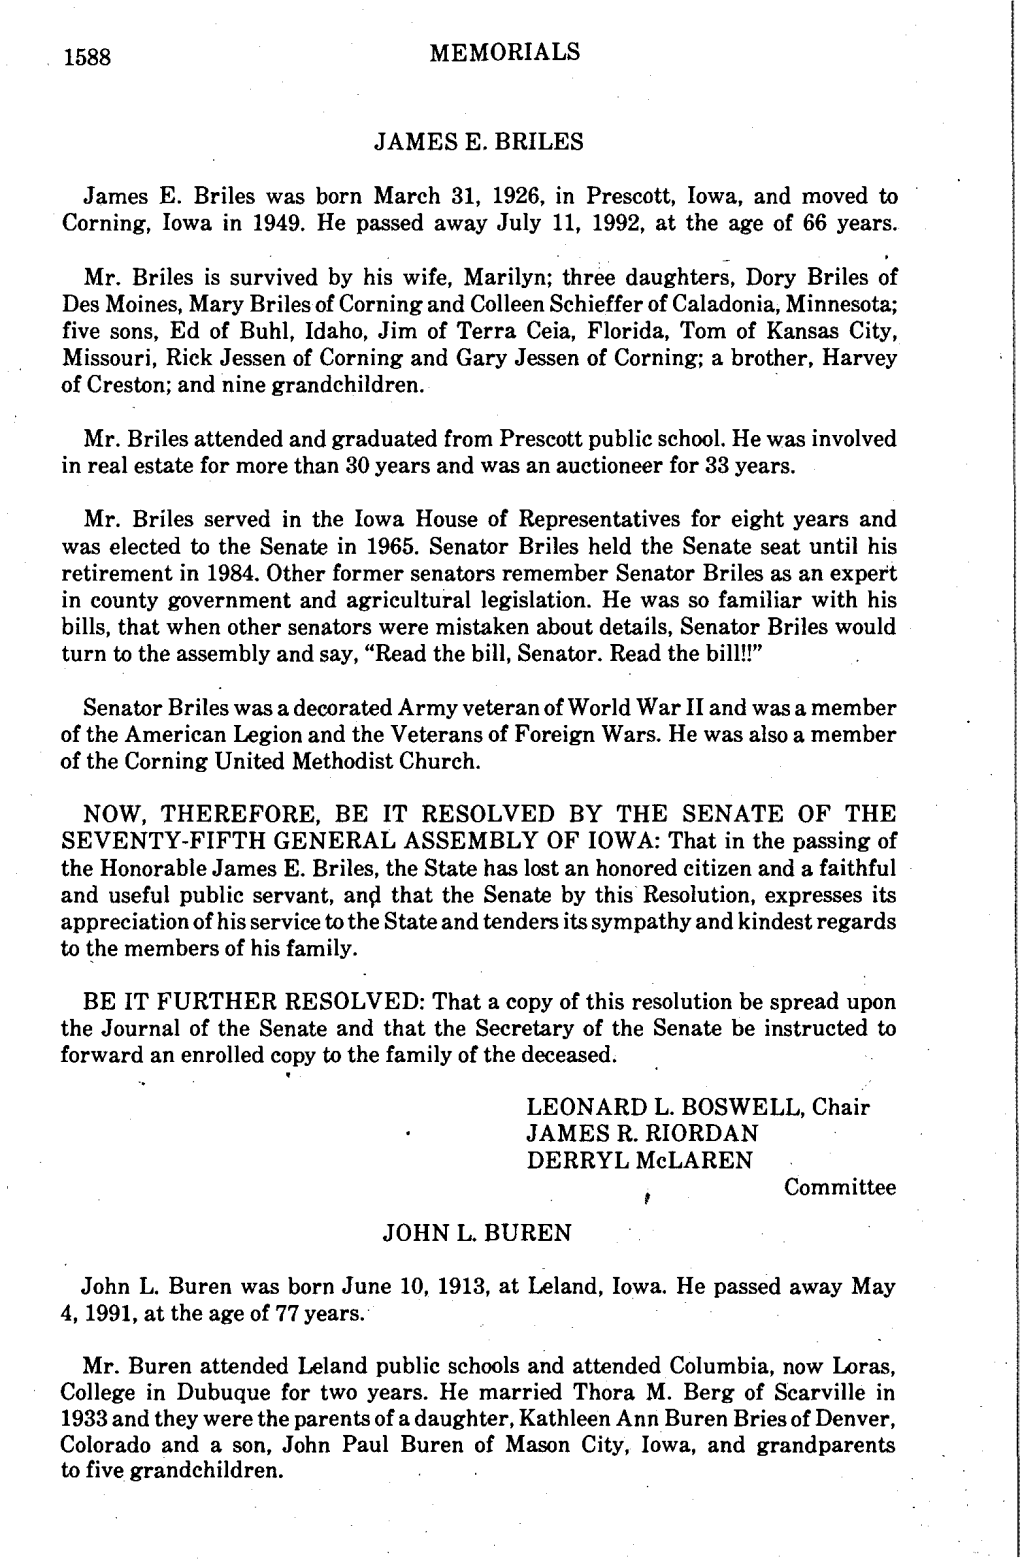 Memorial Resolution Published in Senate